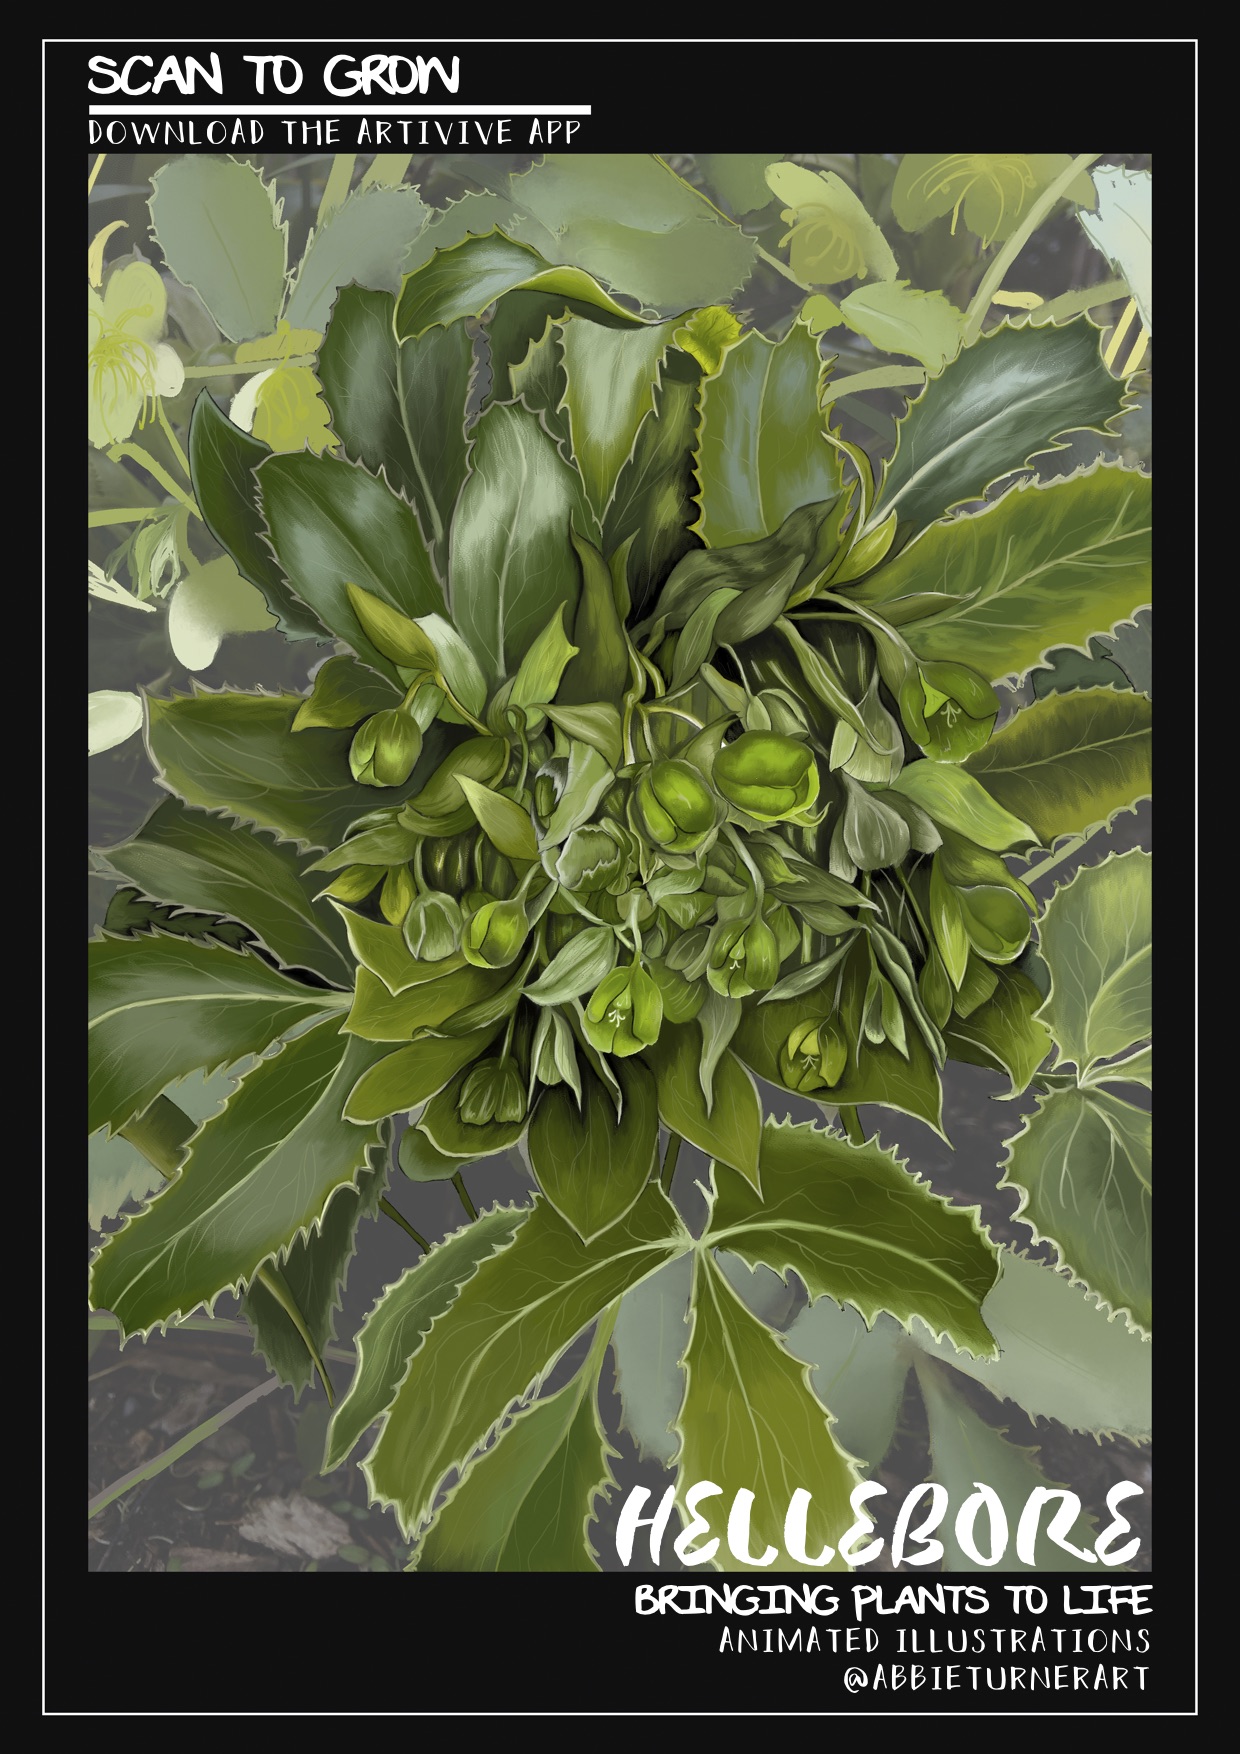 Interactive Digital Illustration of a Hellebore, used to create an engaging and educational experience for visitors at the Cambridge University Botanical Gardens, created using Adobe Photoshop and Wacom Graphics Tablet - Abbie Turner